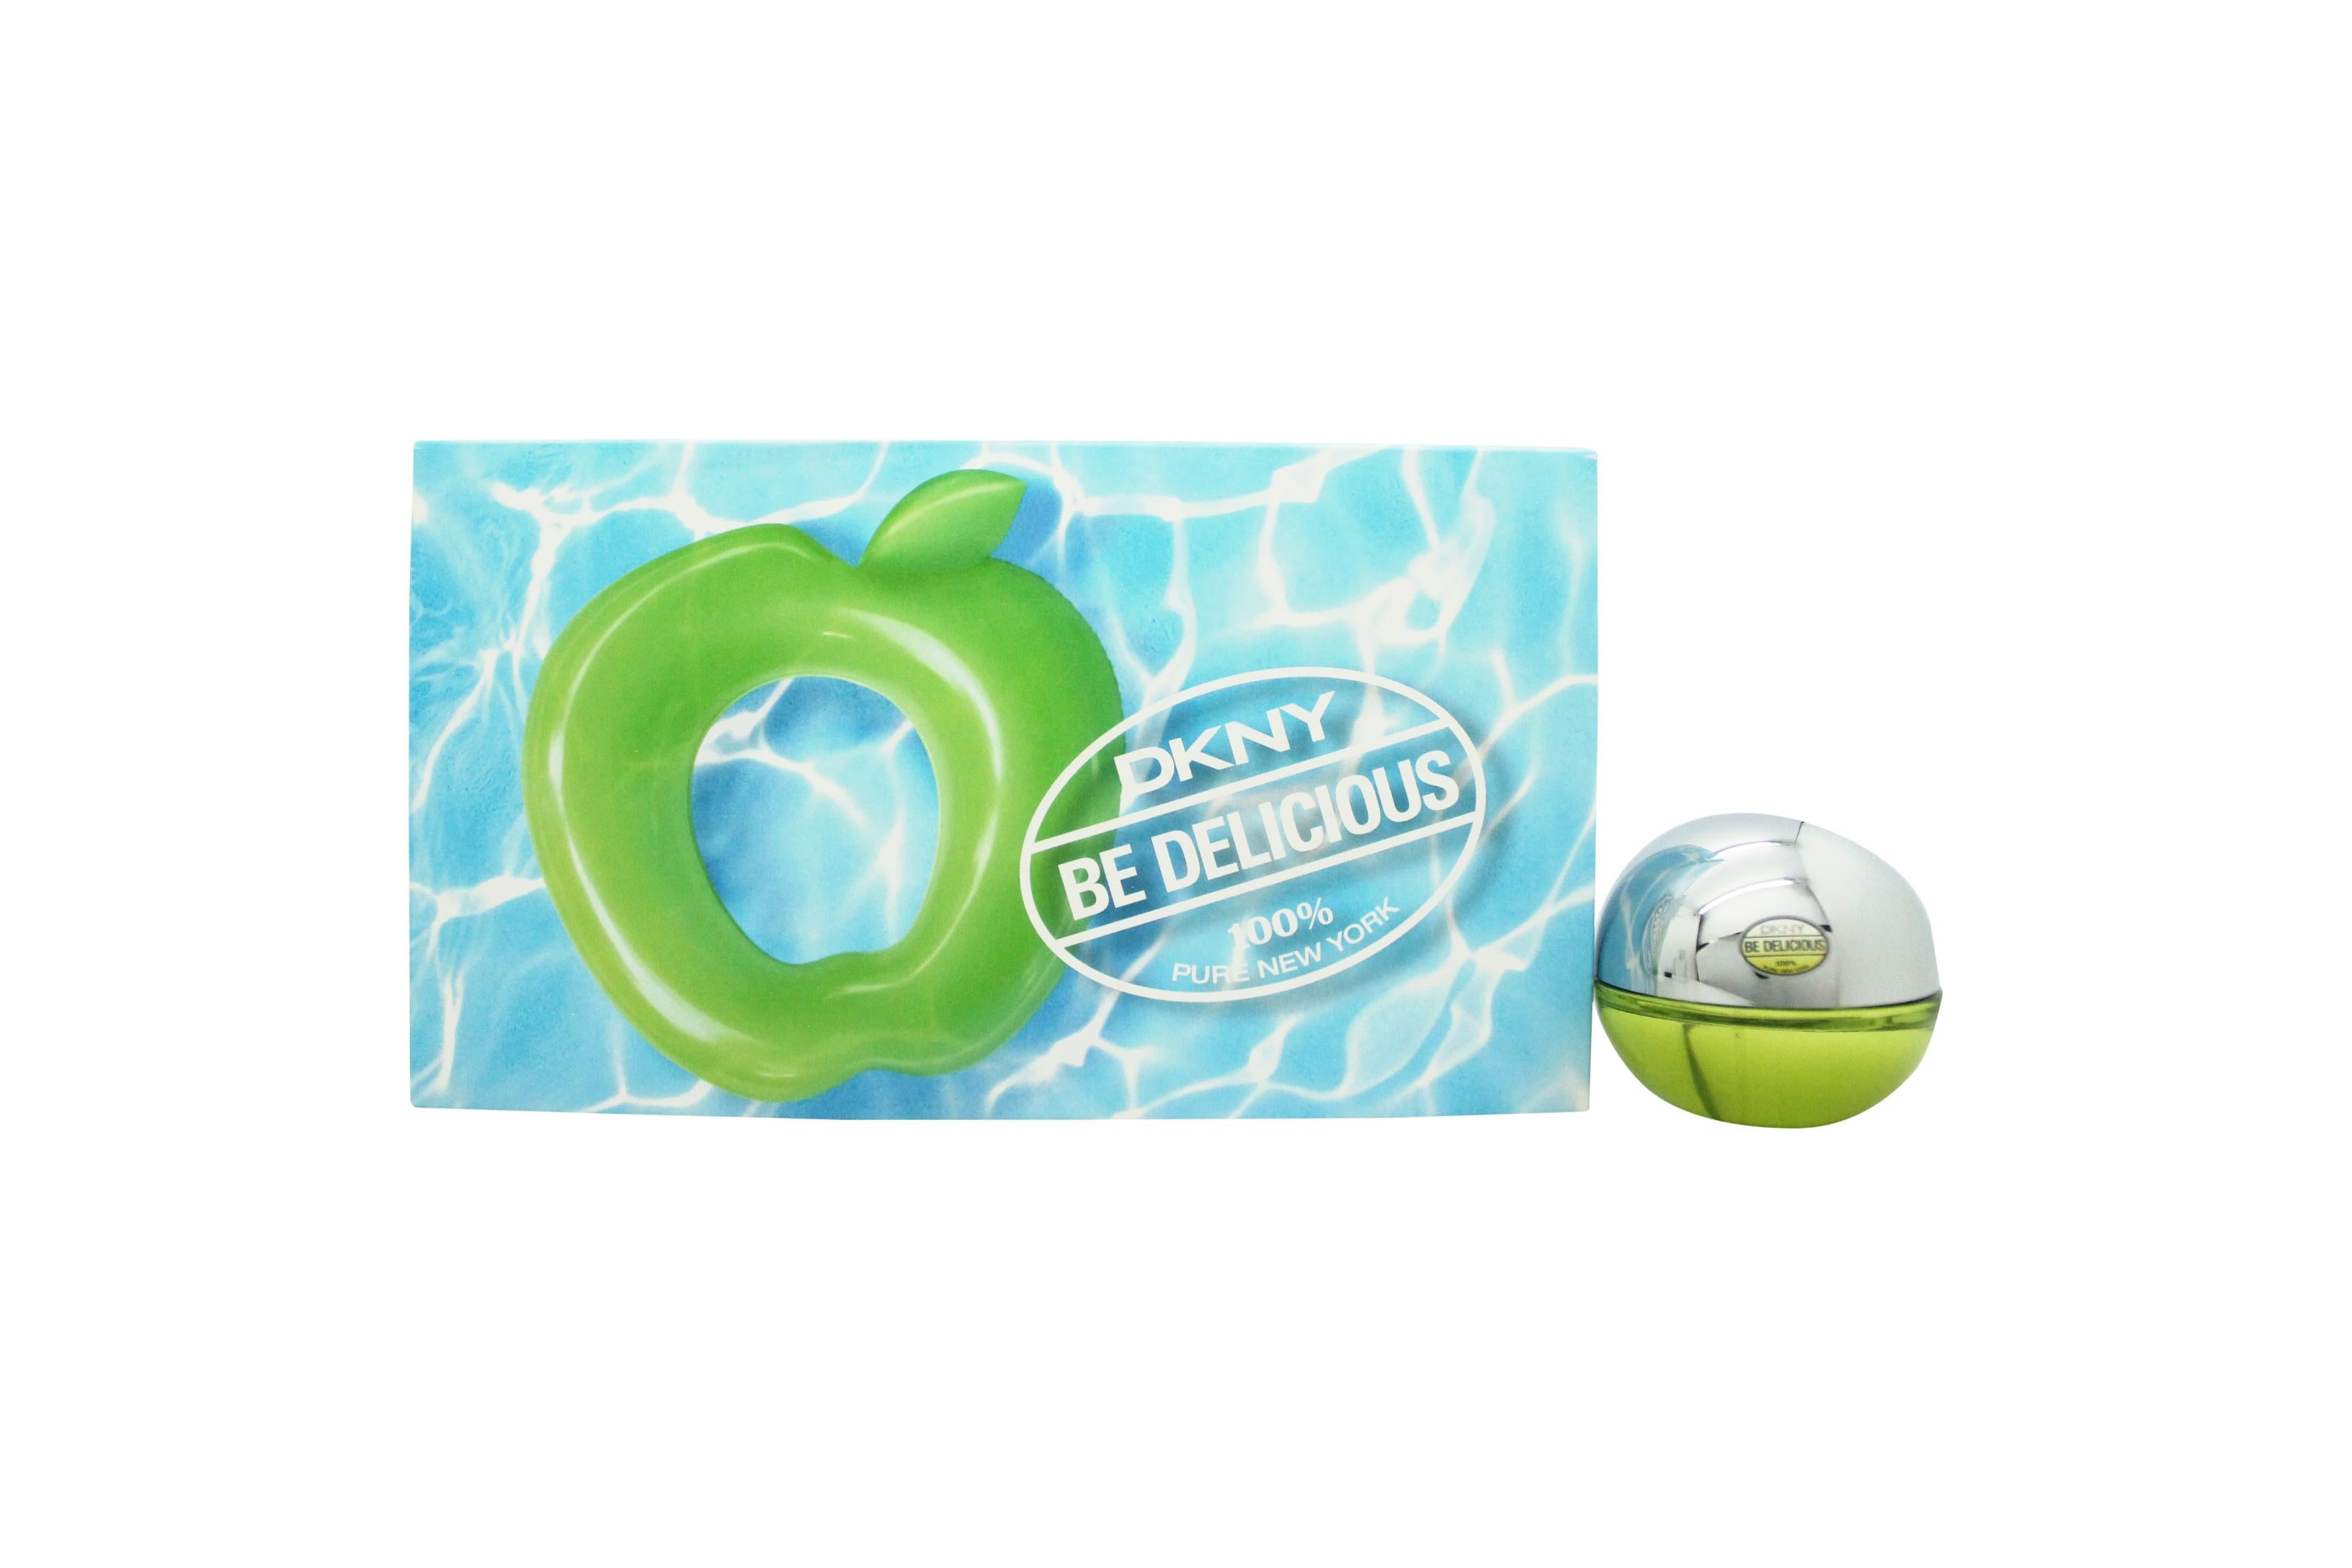 View DKNY Be Delicious Gift Set 30ml EDP Beach Ball information